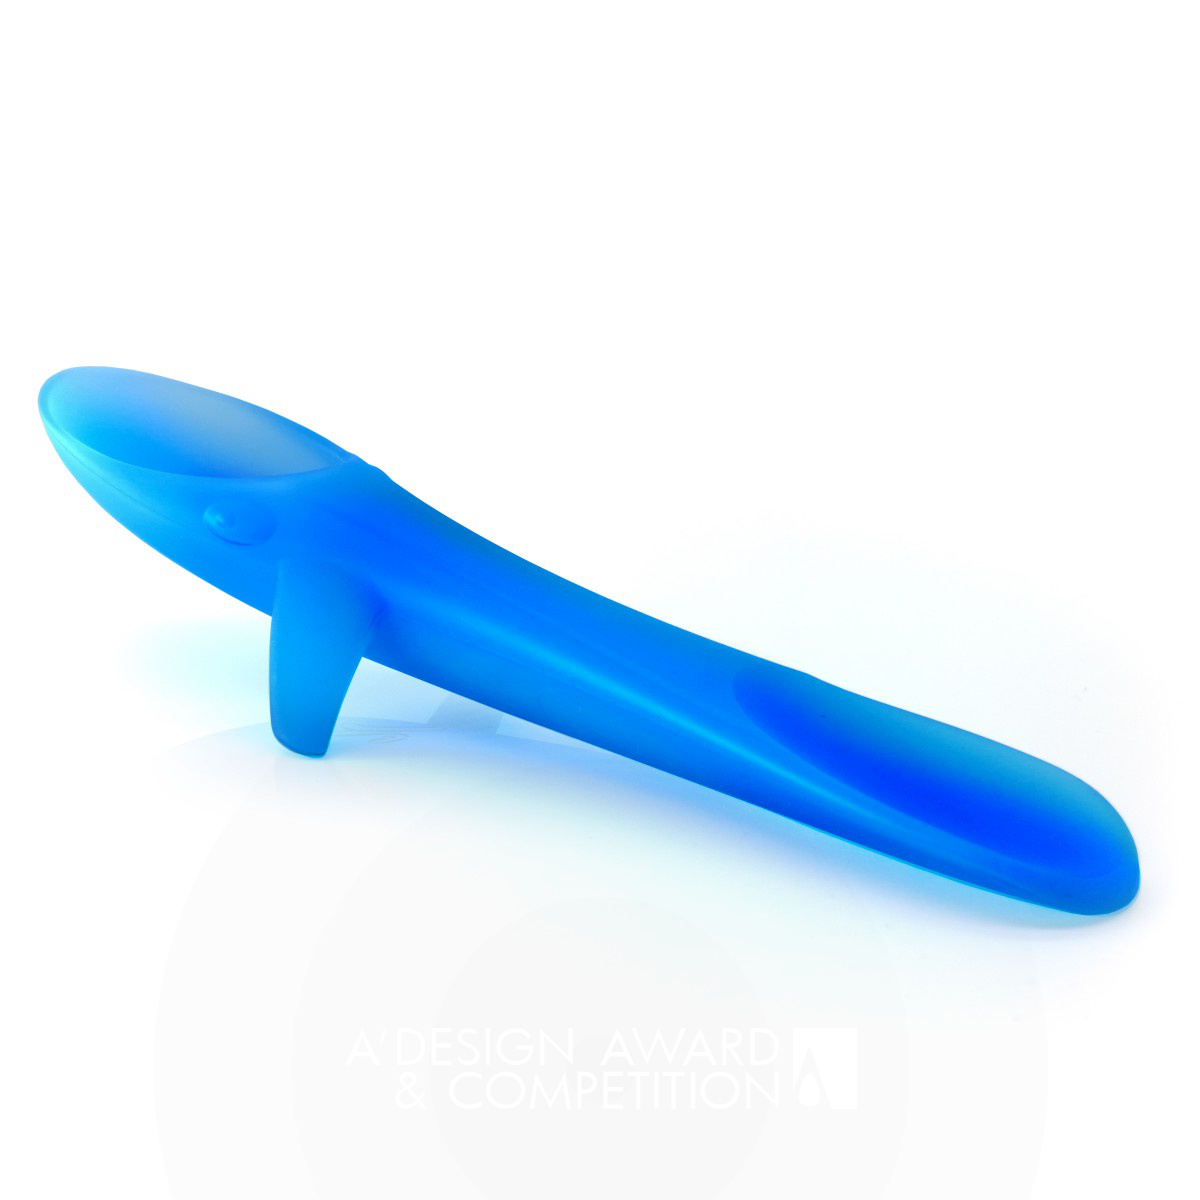 Revolutionizing Infant Feeding: The Whale Spoon by Roberto Stein